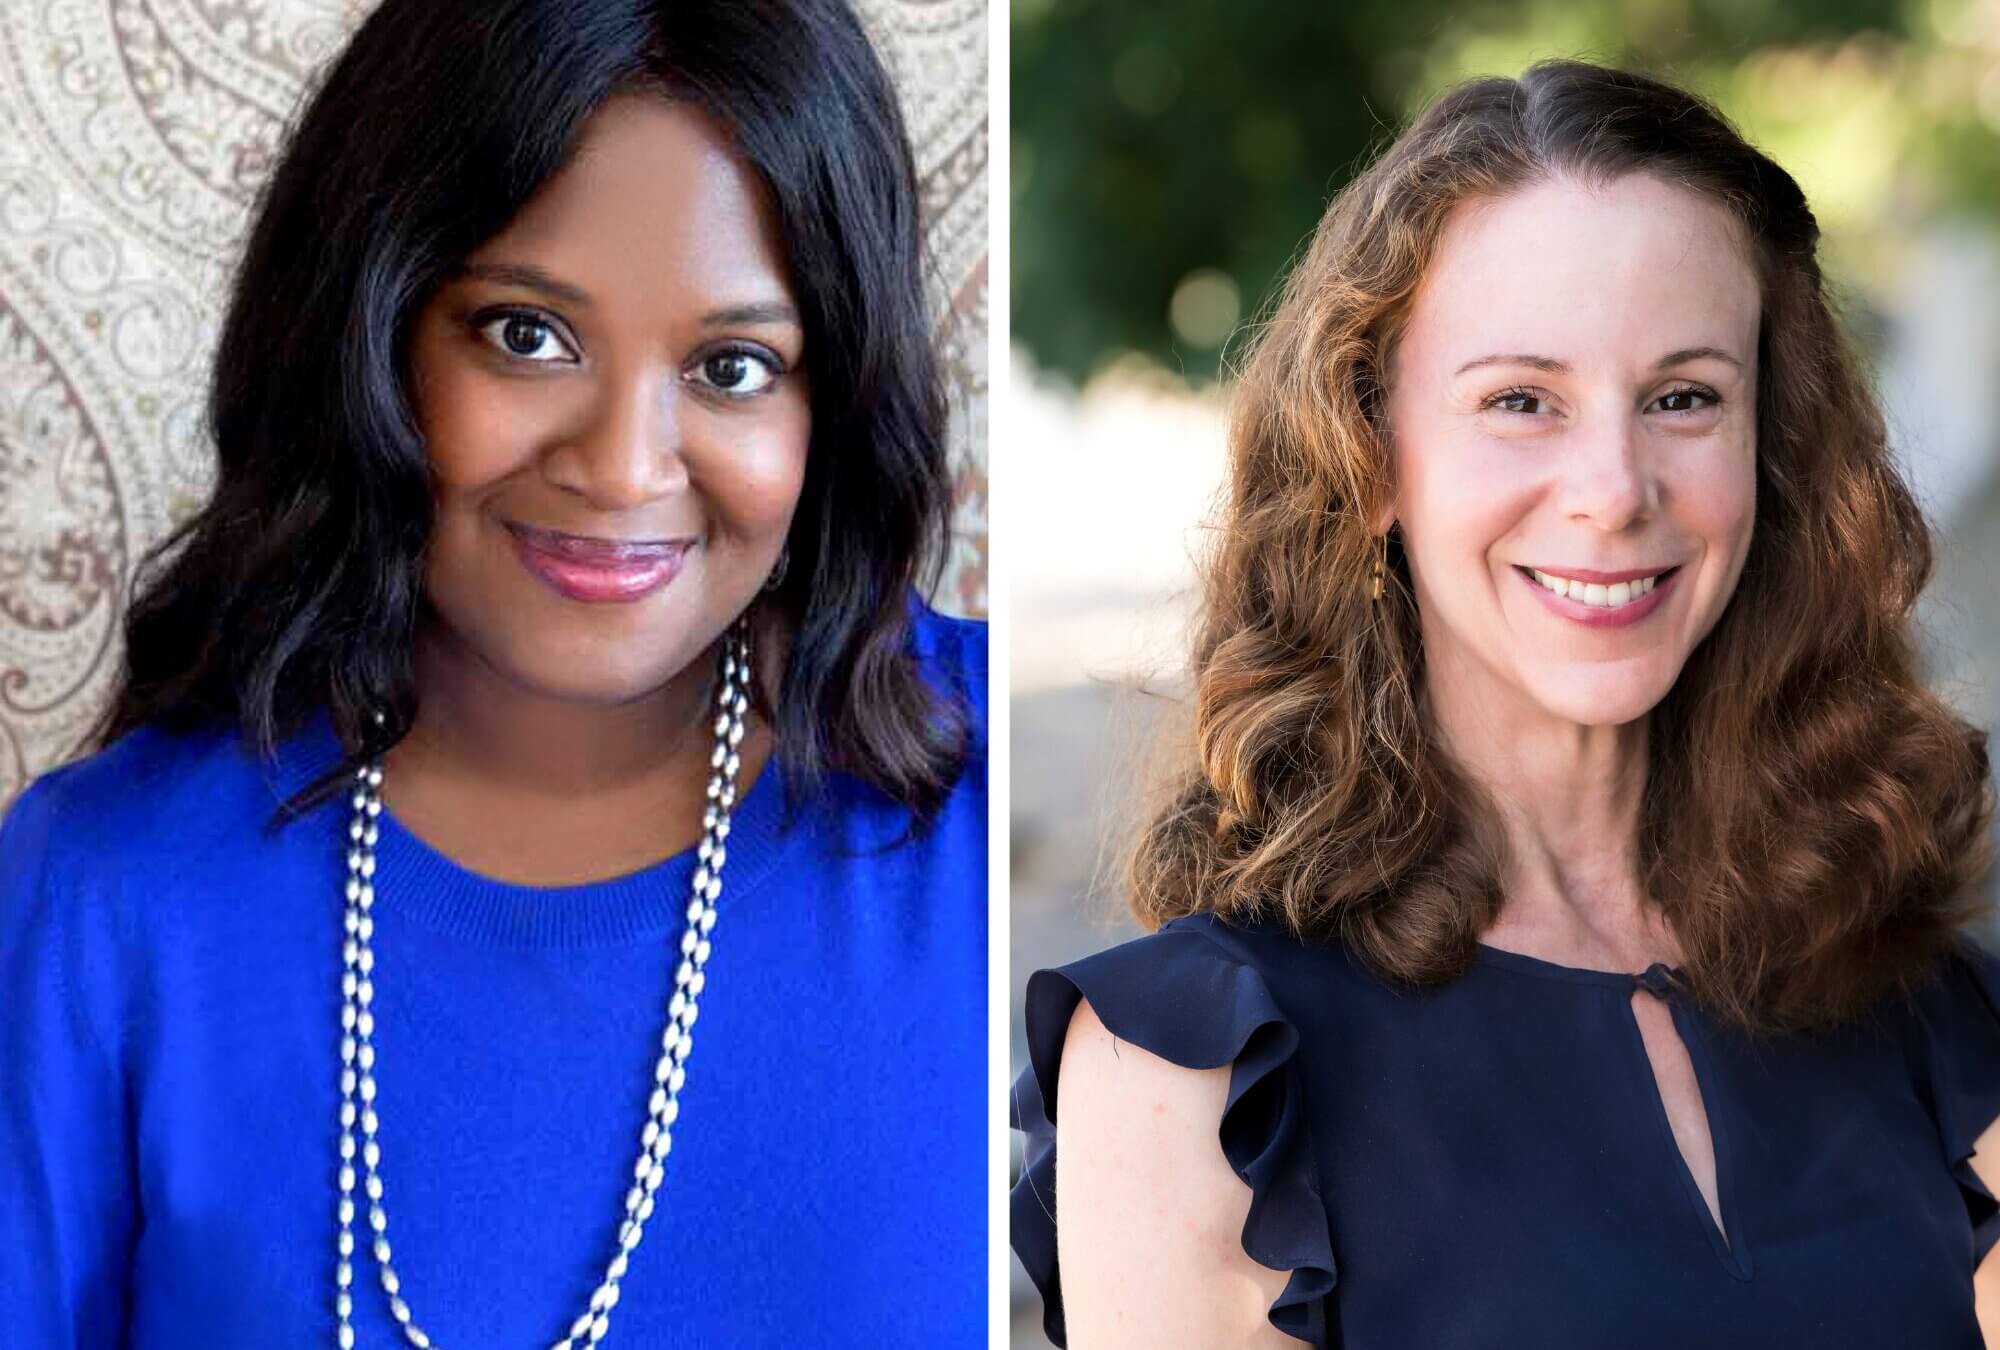 Shaunna J. Edwards is a lawyer turned diversity, equity, and inclusion leader. Alyson Richman is a writer with seven other novels under her belt.